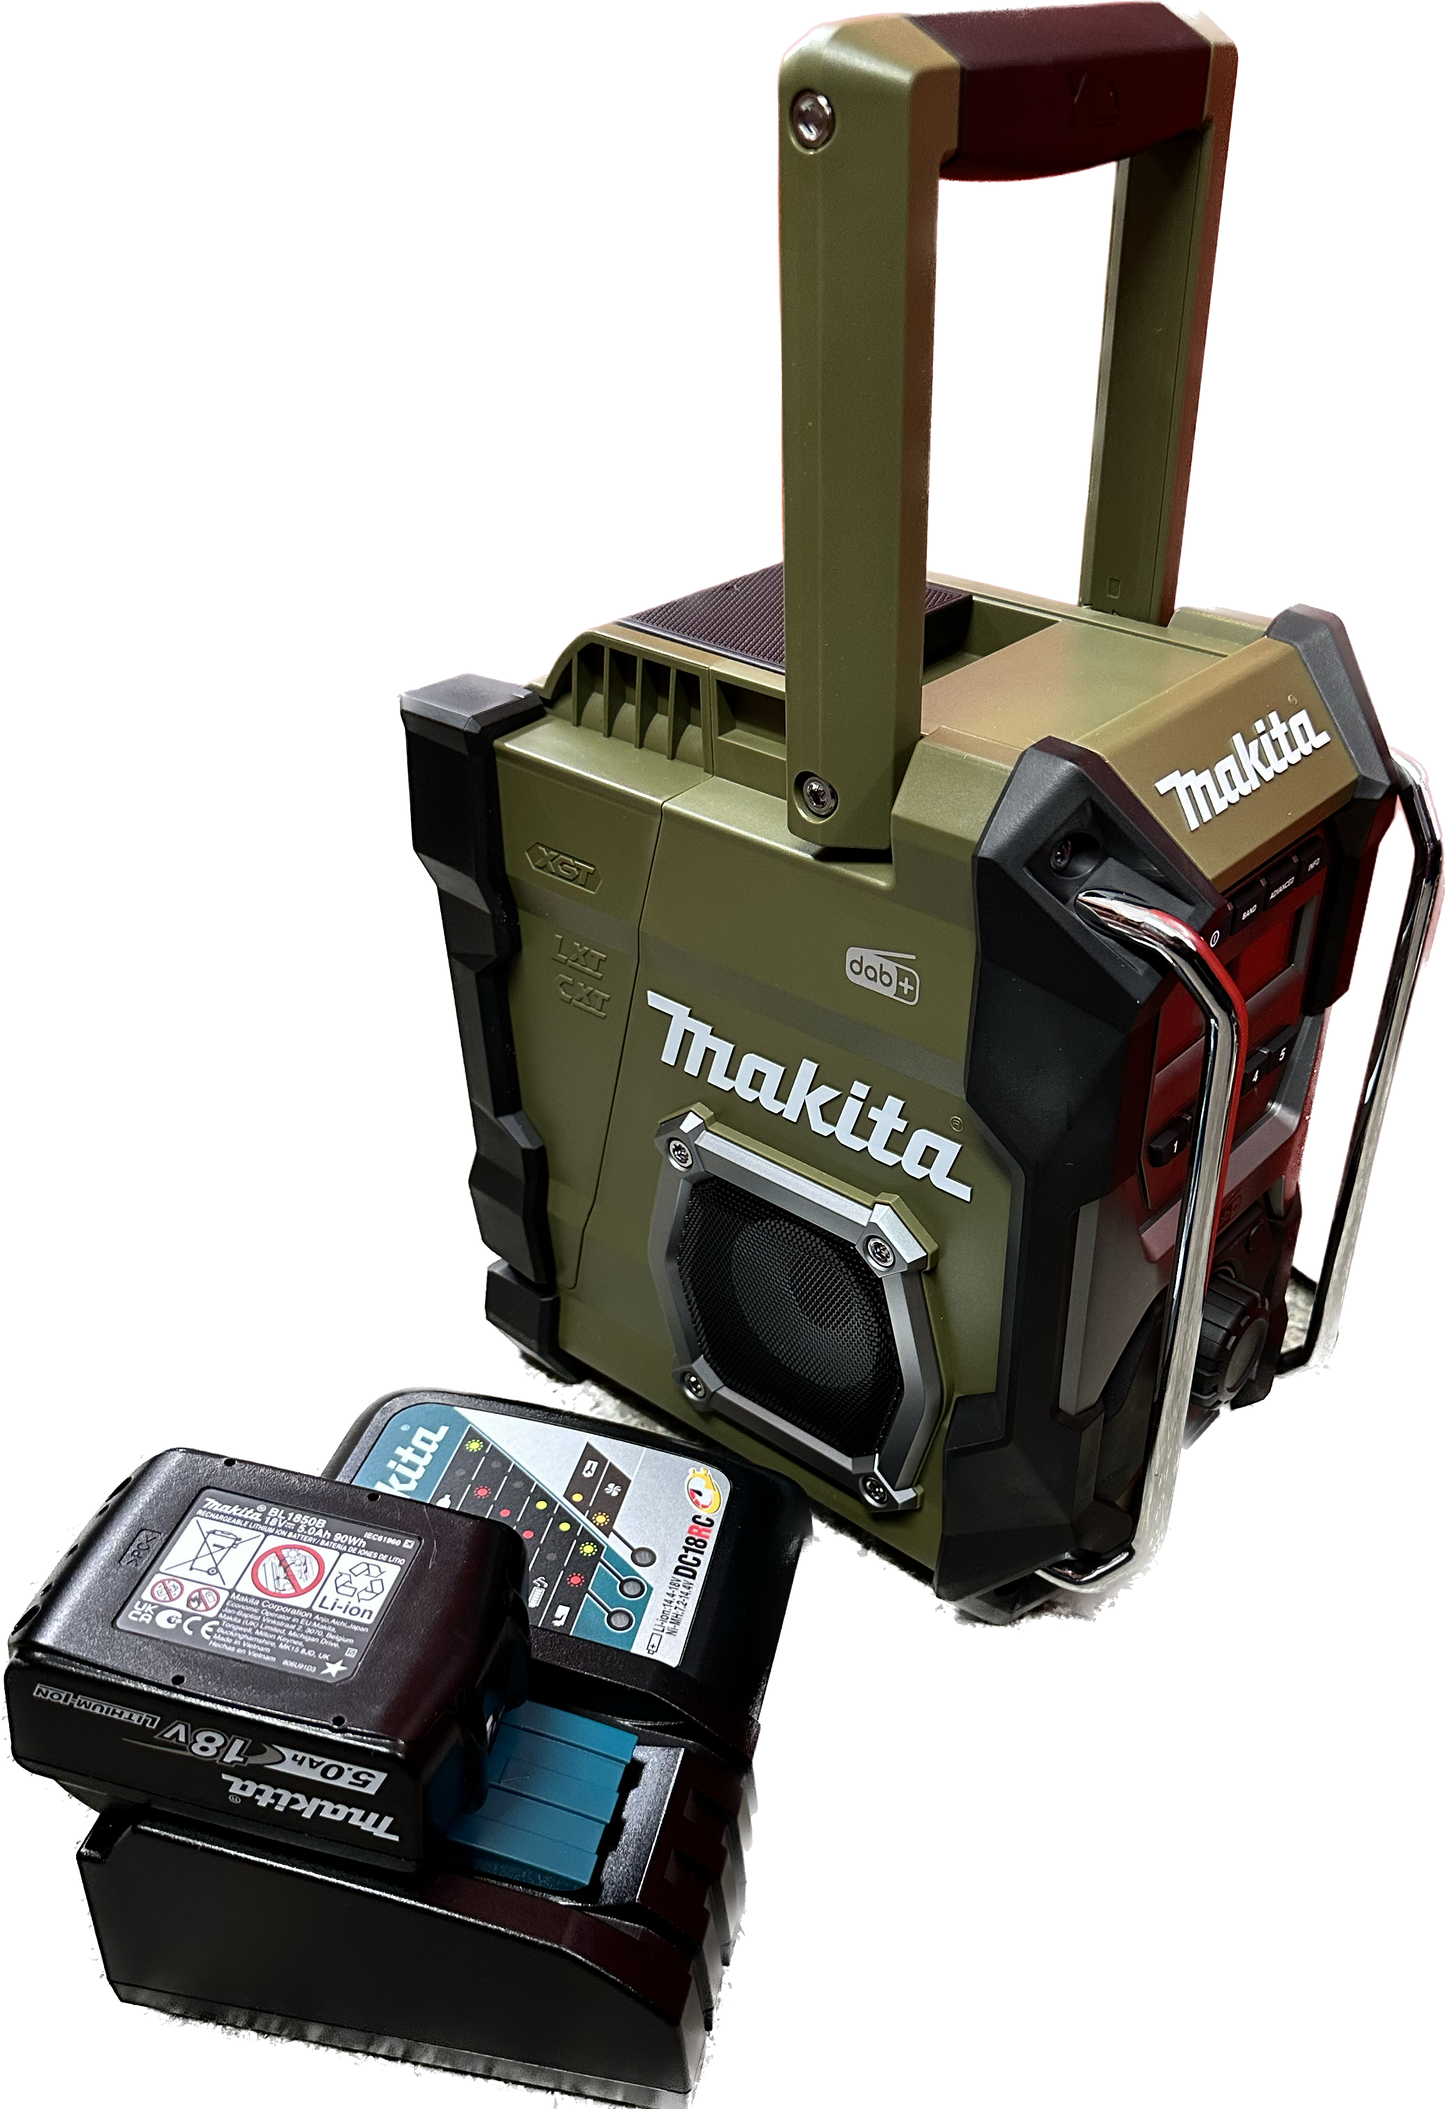 MAKITA OLIVE MR003 18V/40V DAB RADIO WITH 5AH BATTERY AND FAST CHARGER.